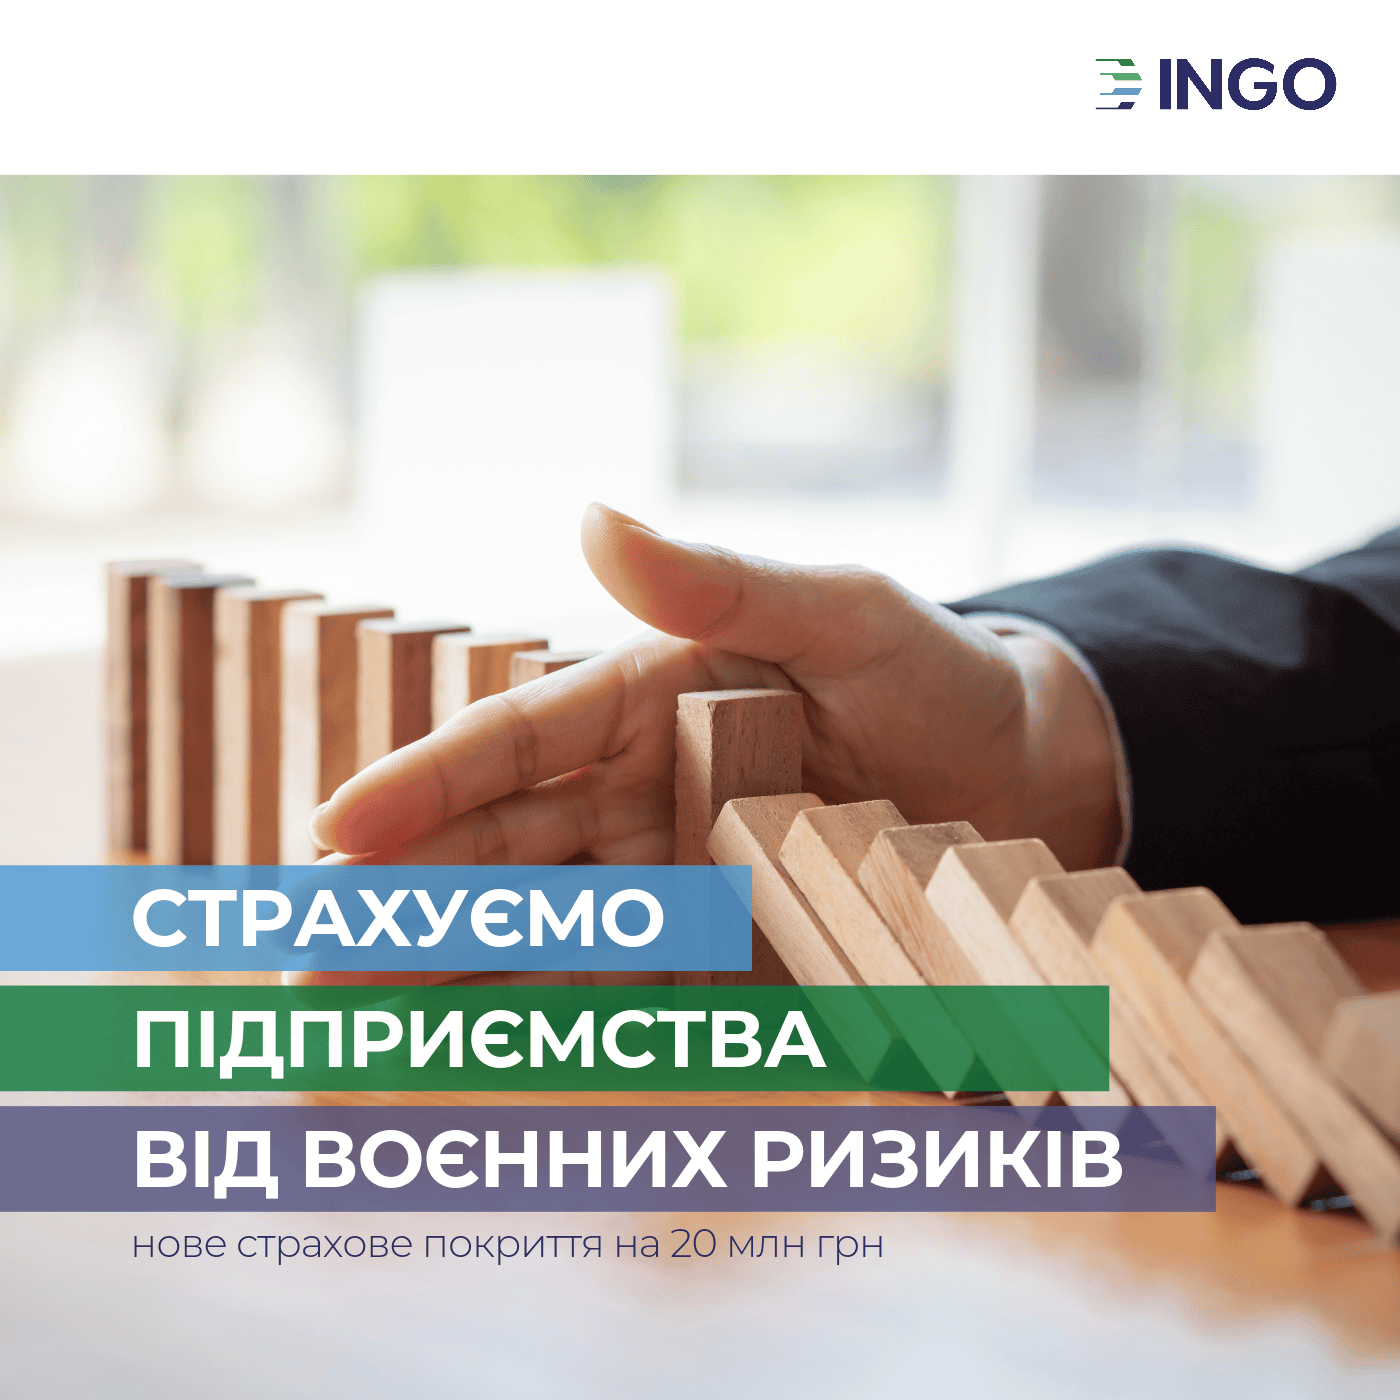 INGO will indemnify Ukrainian business for losses caused by the consequences of war action